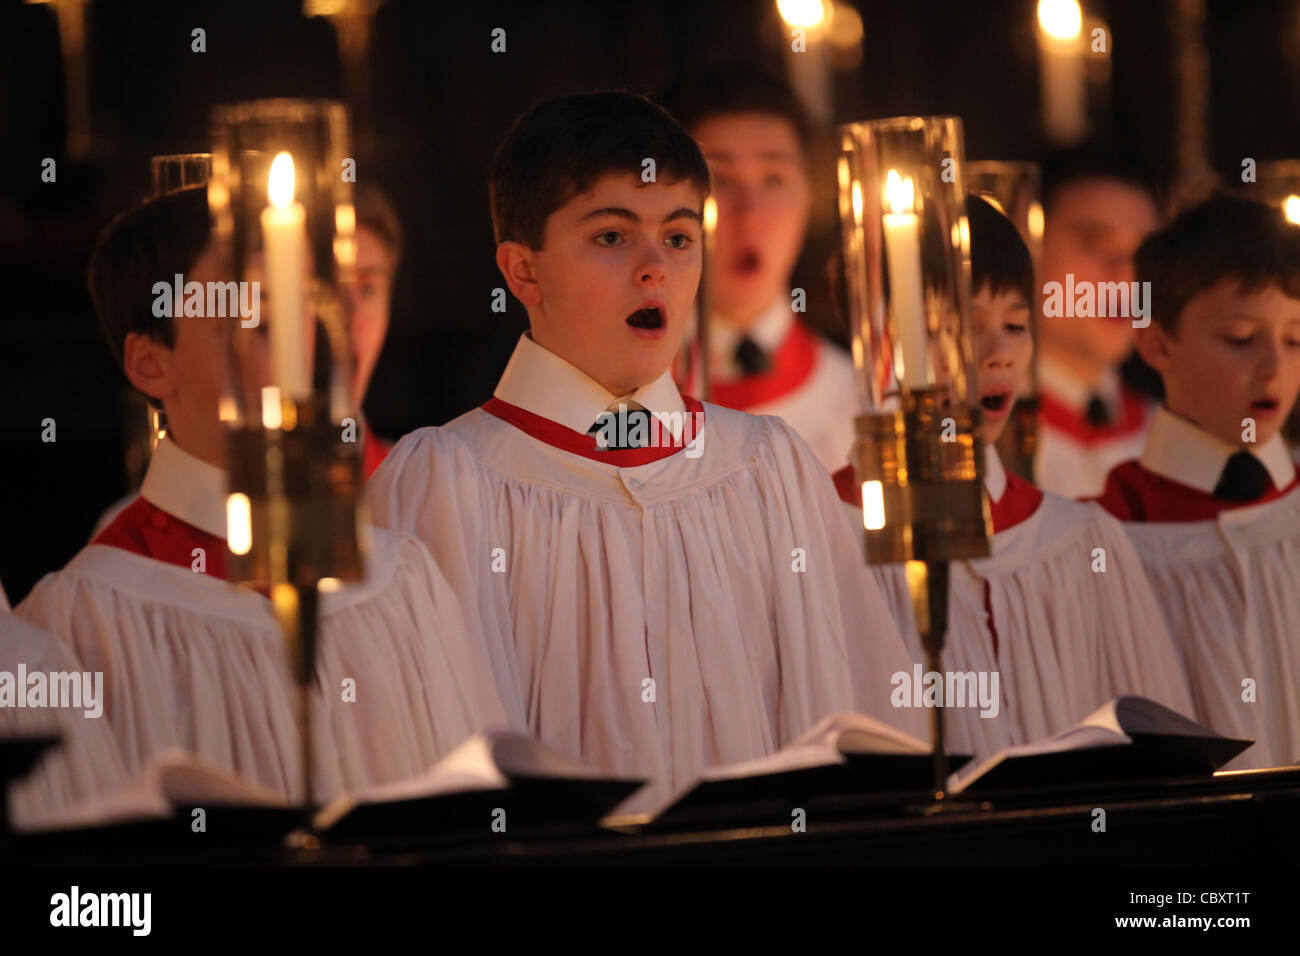 KING'S COLLEGE CHOIR BOYS PREPARING FOR THE CHRISTMAS EVE SERVICE AT